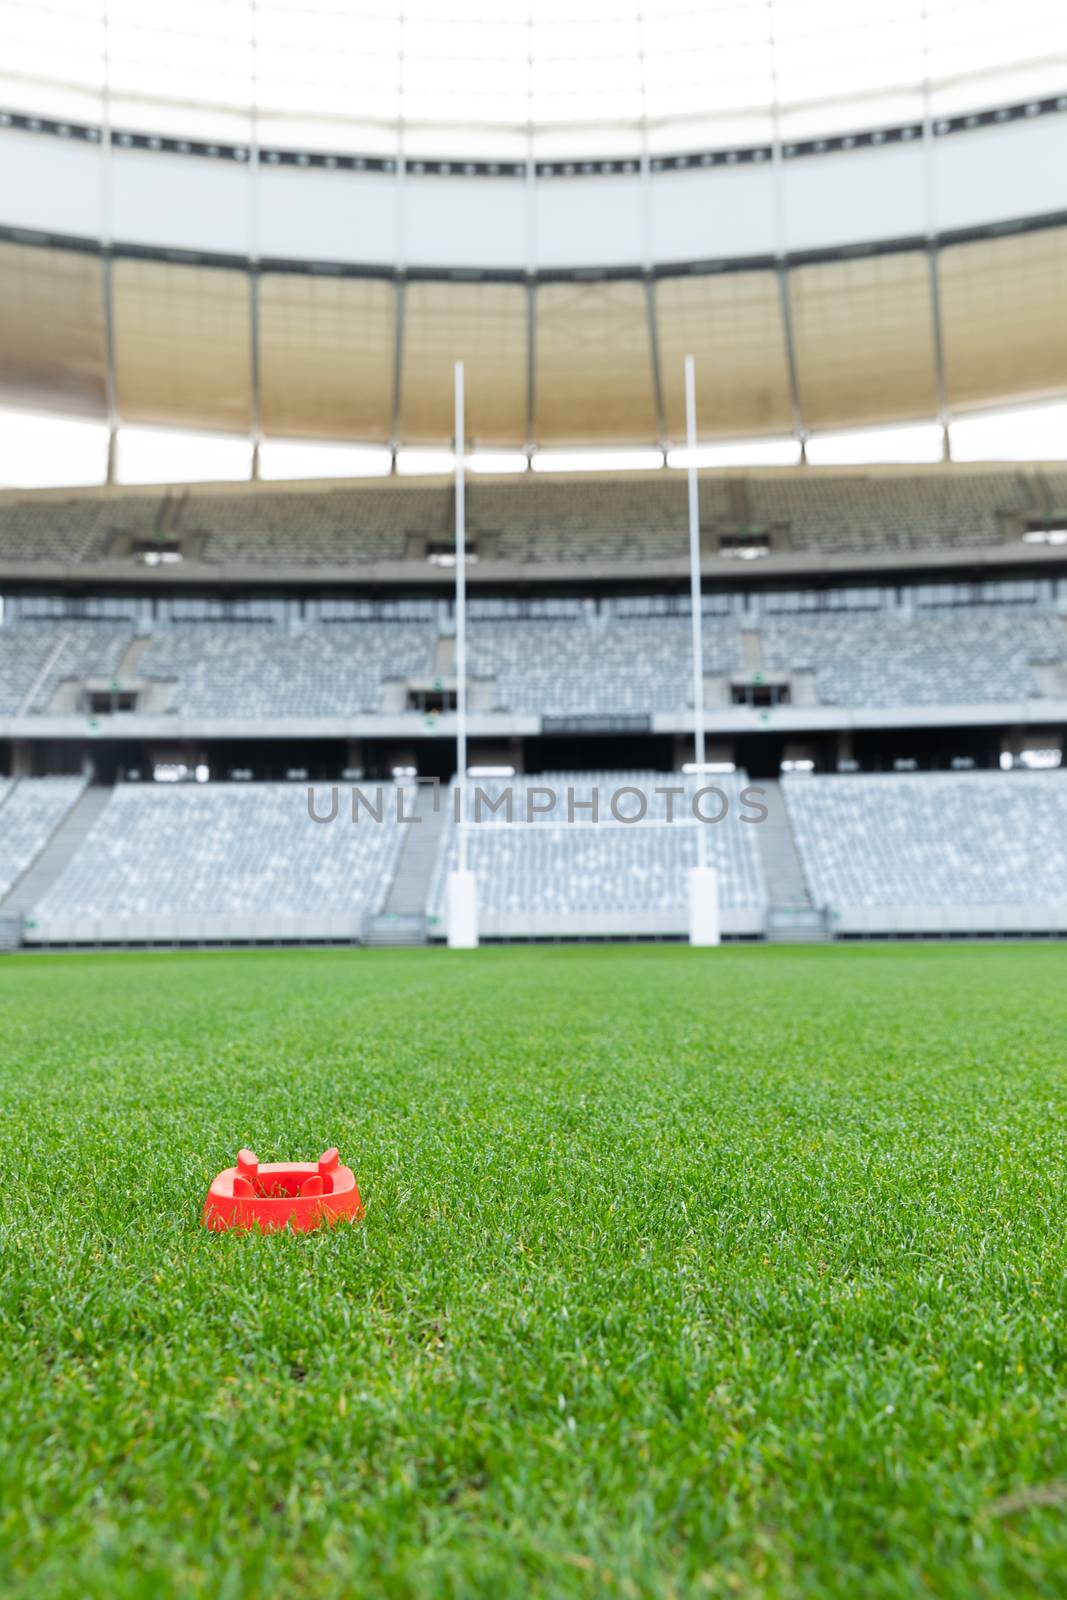 Rugby ball stand in a stadium by Wavebreakmedia